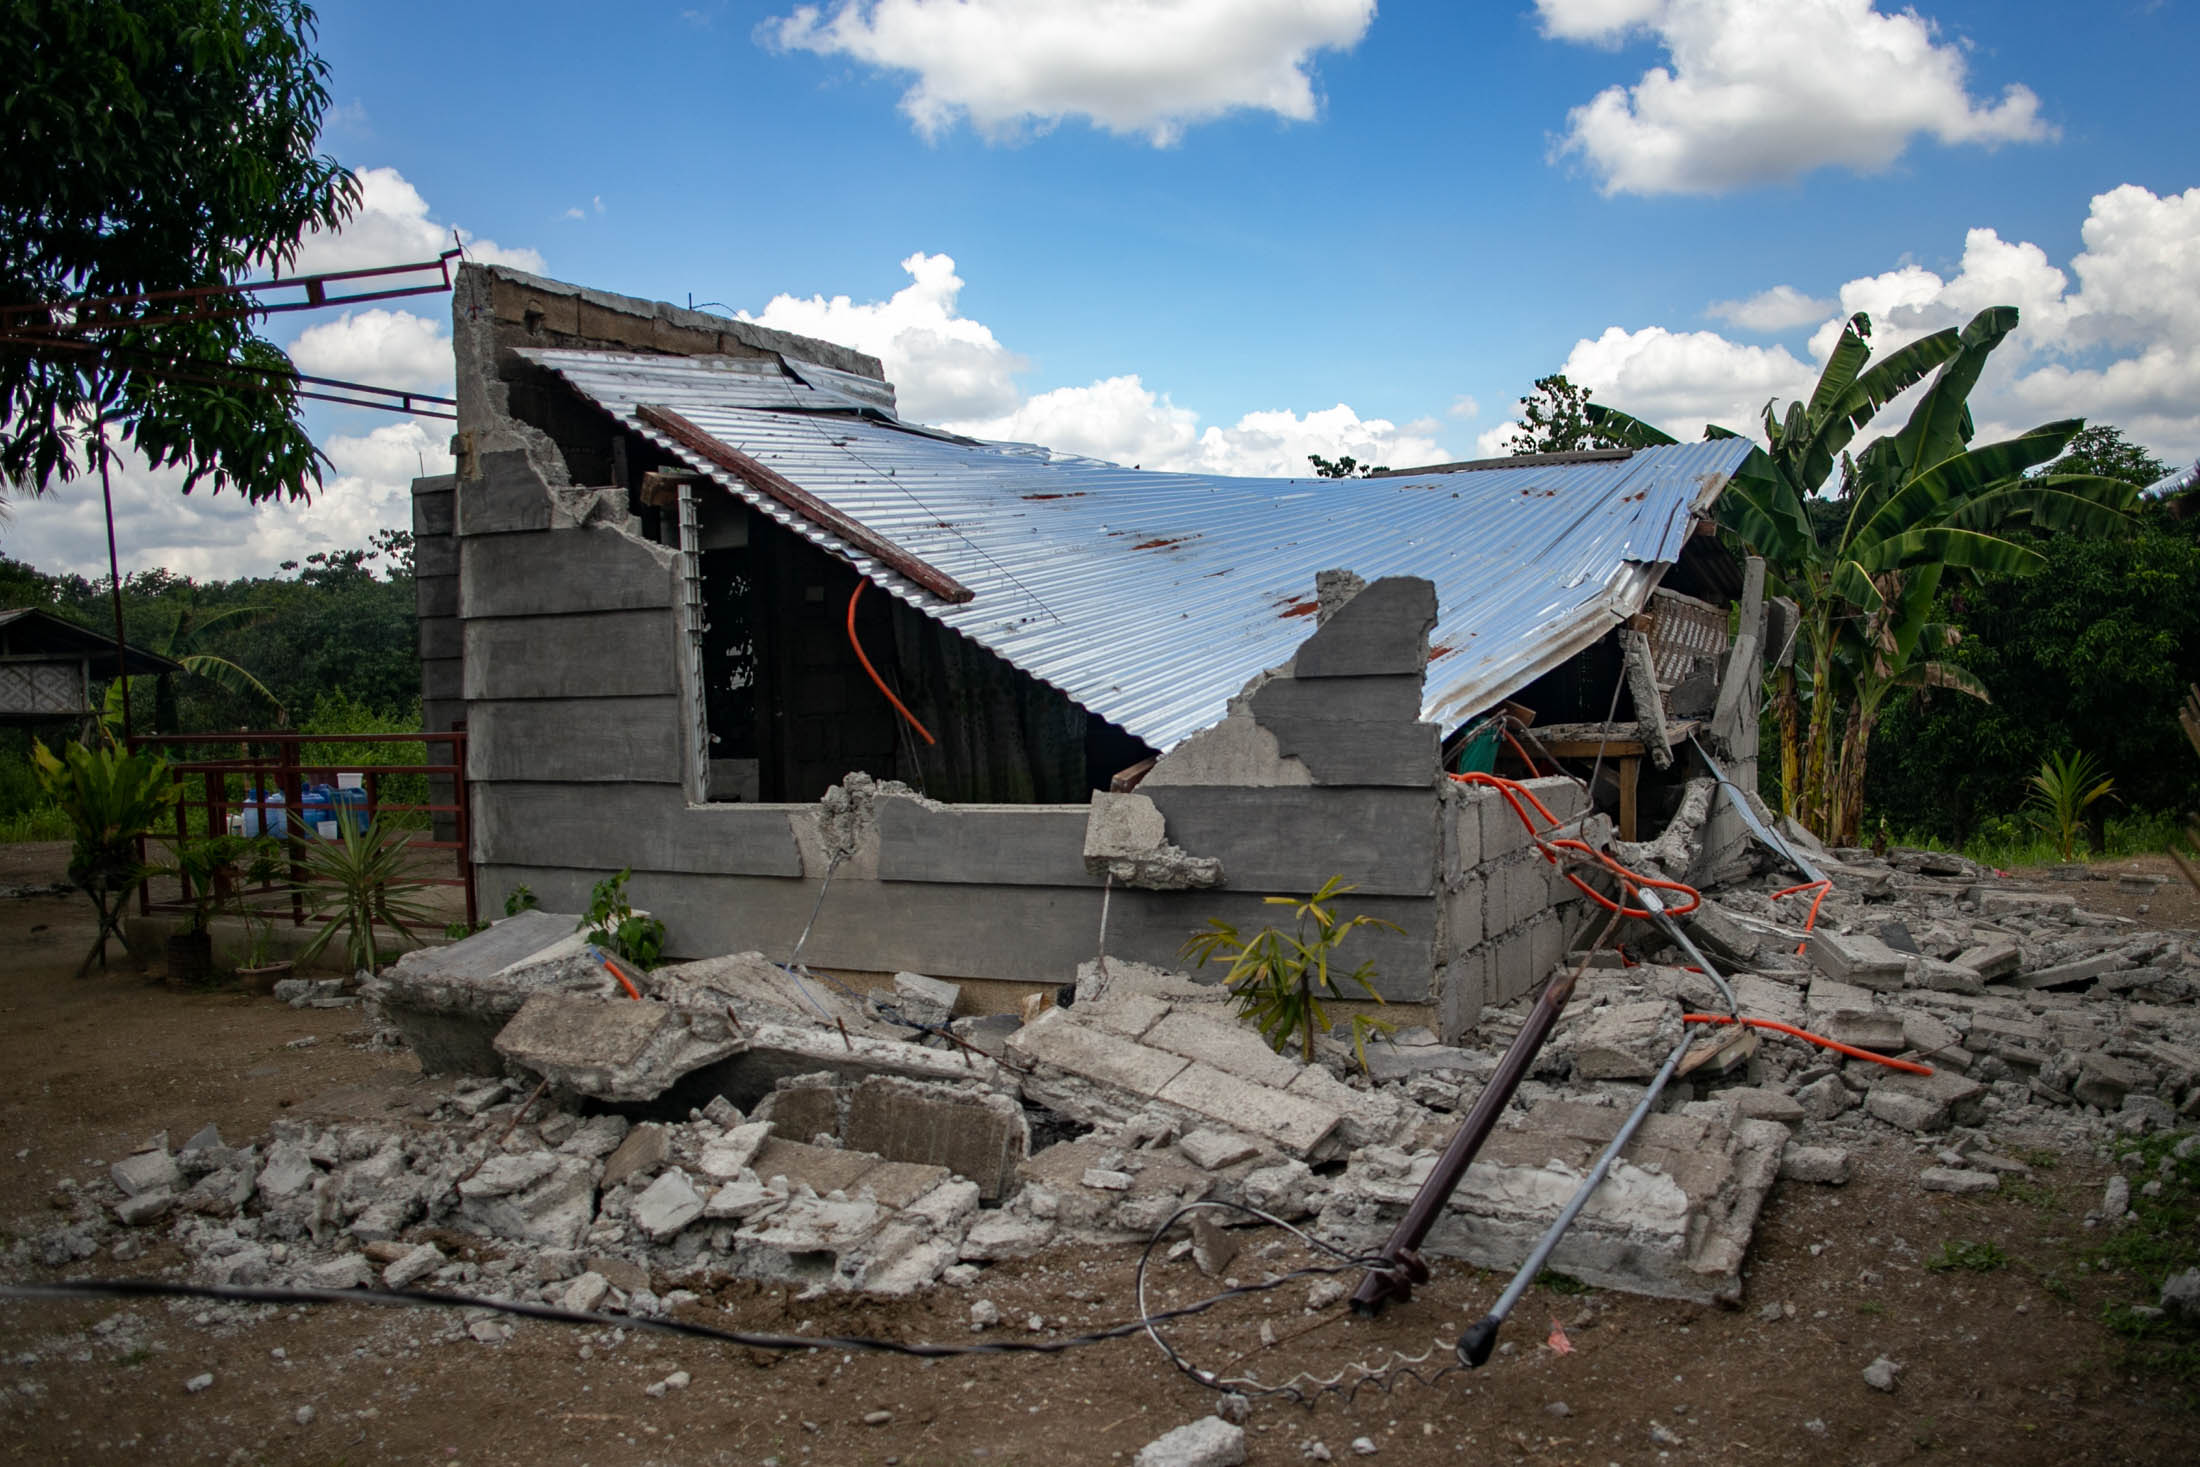 DAMAGE. A house in Barangay Malawanit in the town of Magsaysay, Davao del Sur is partially damaged following a magnitude 6.3 earthquake on October 16, 2019. Rappler file photo 